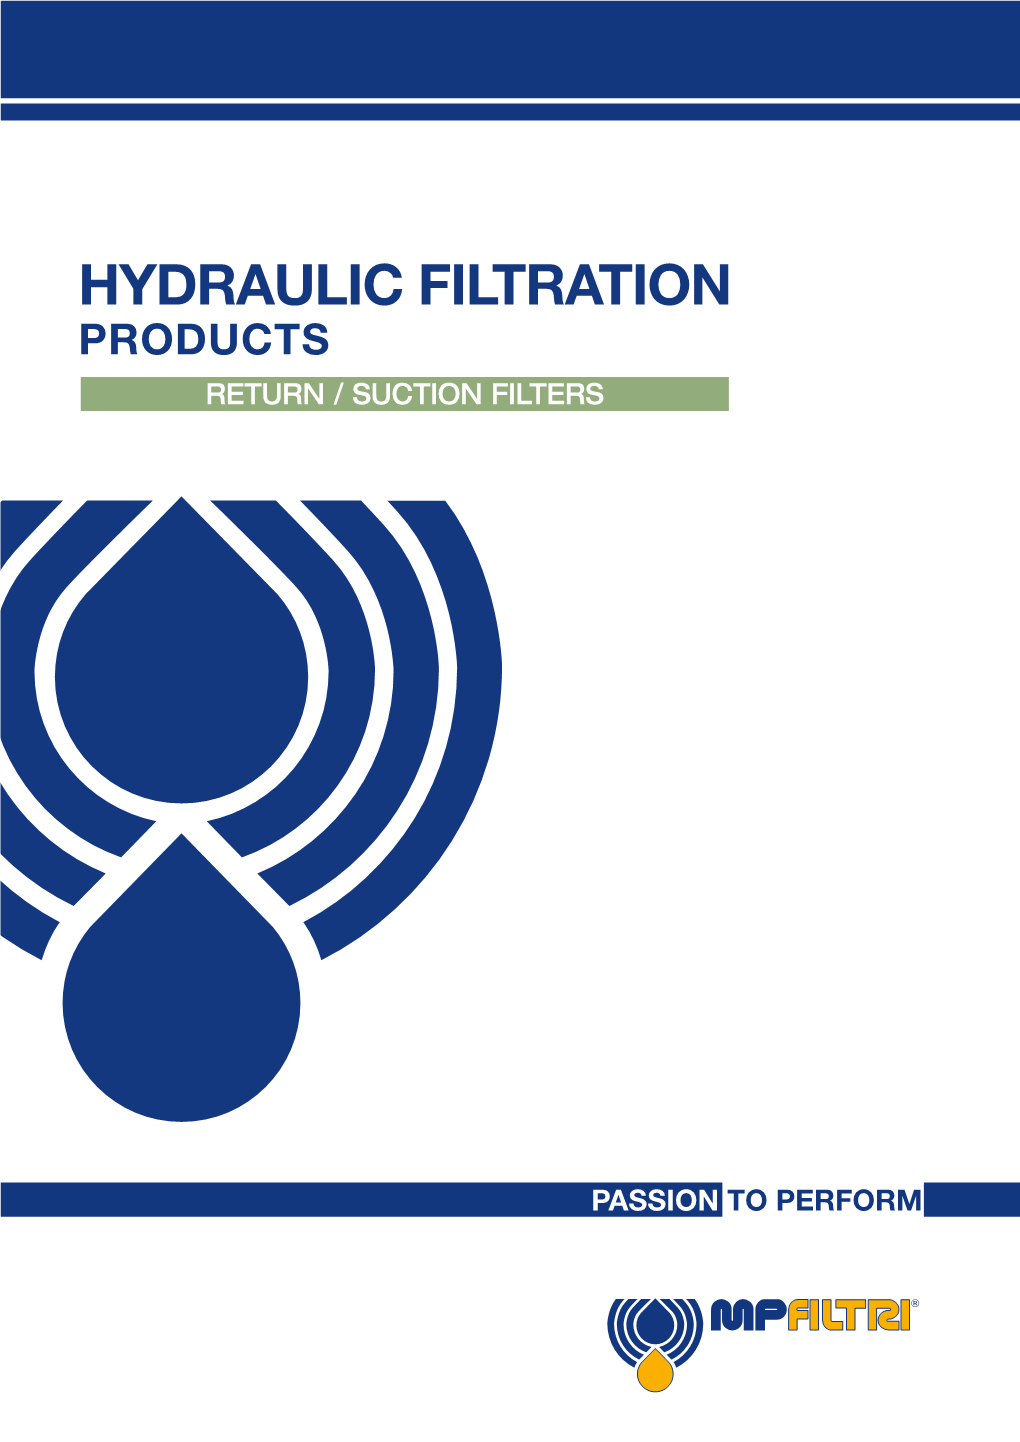 Hydraulic Filtration Products Return / Suction Filters